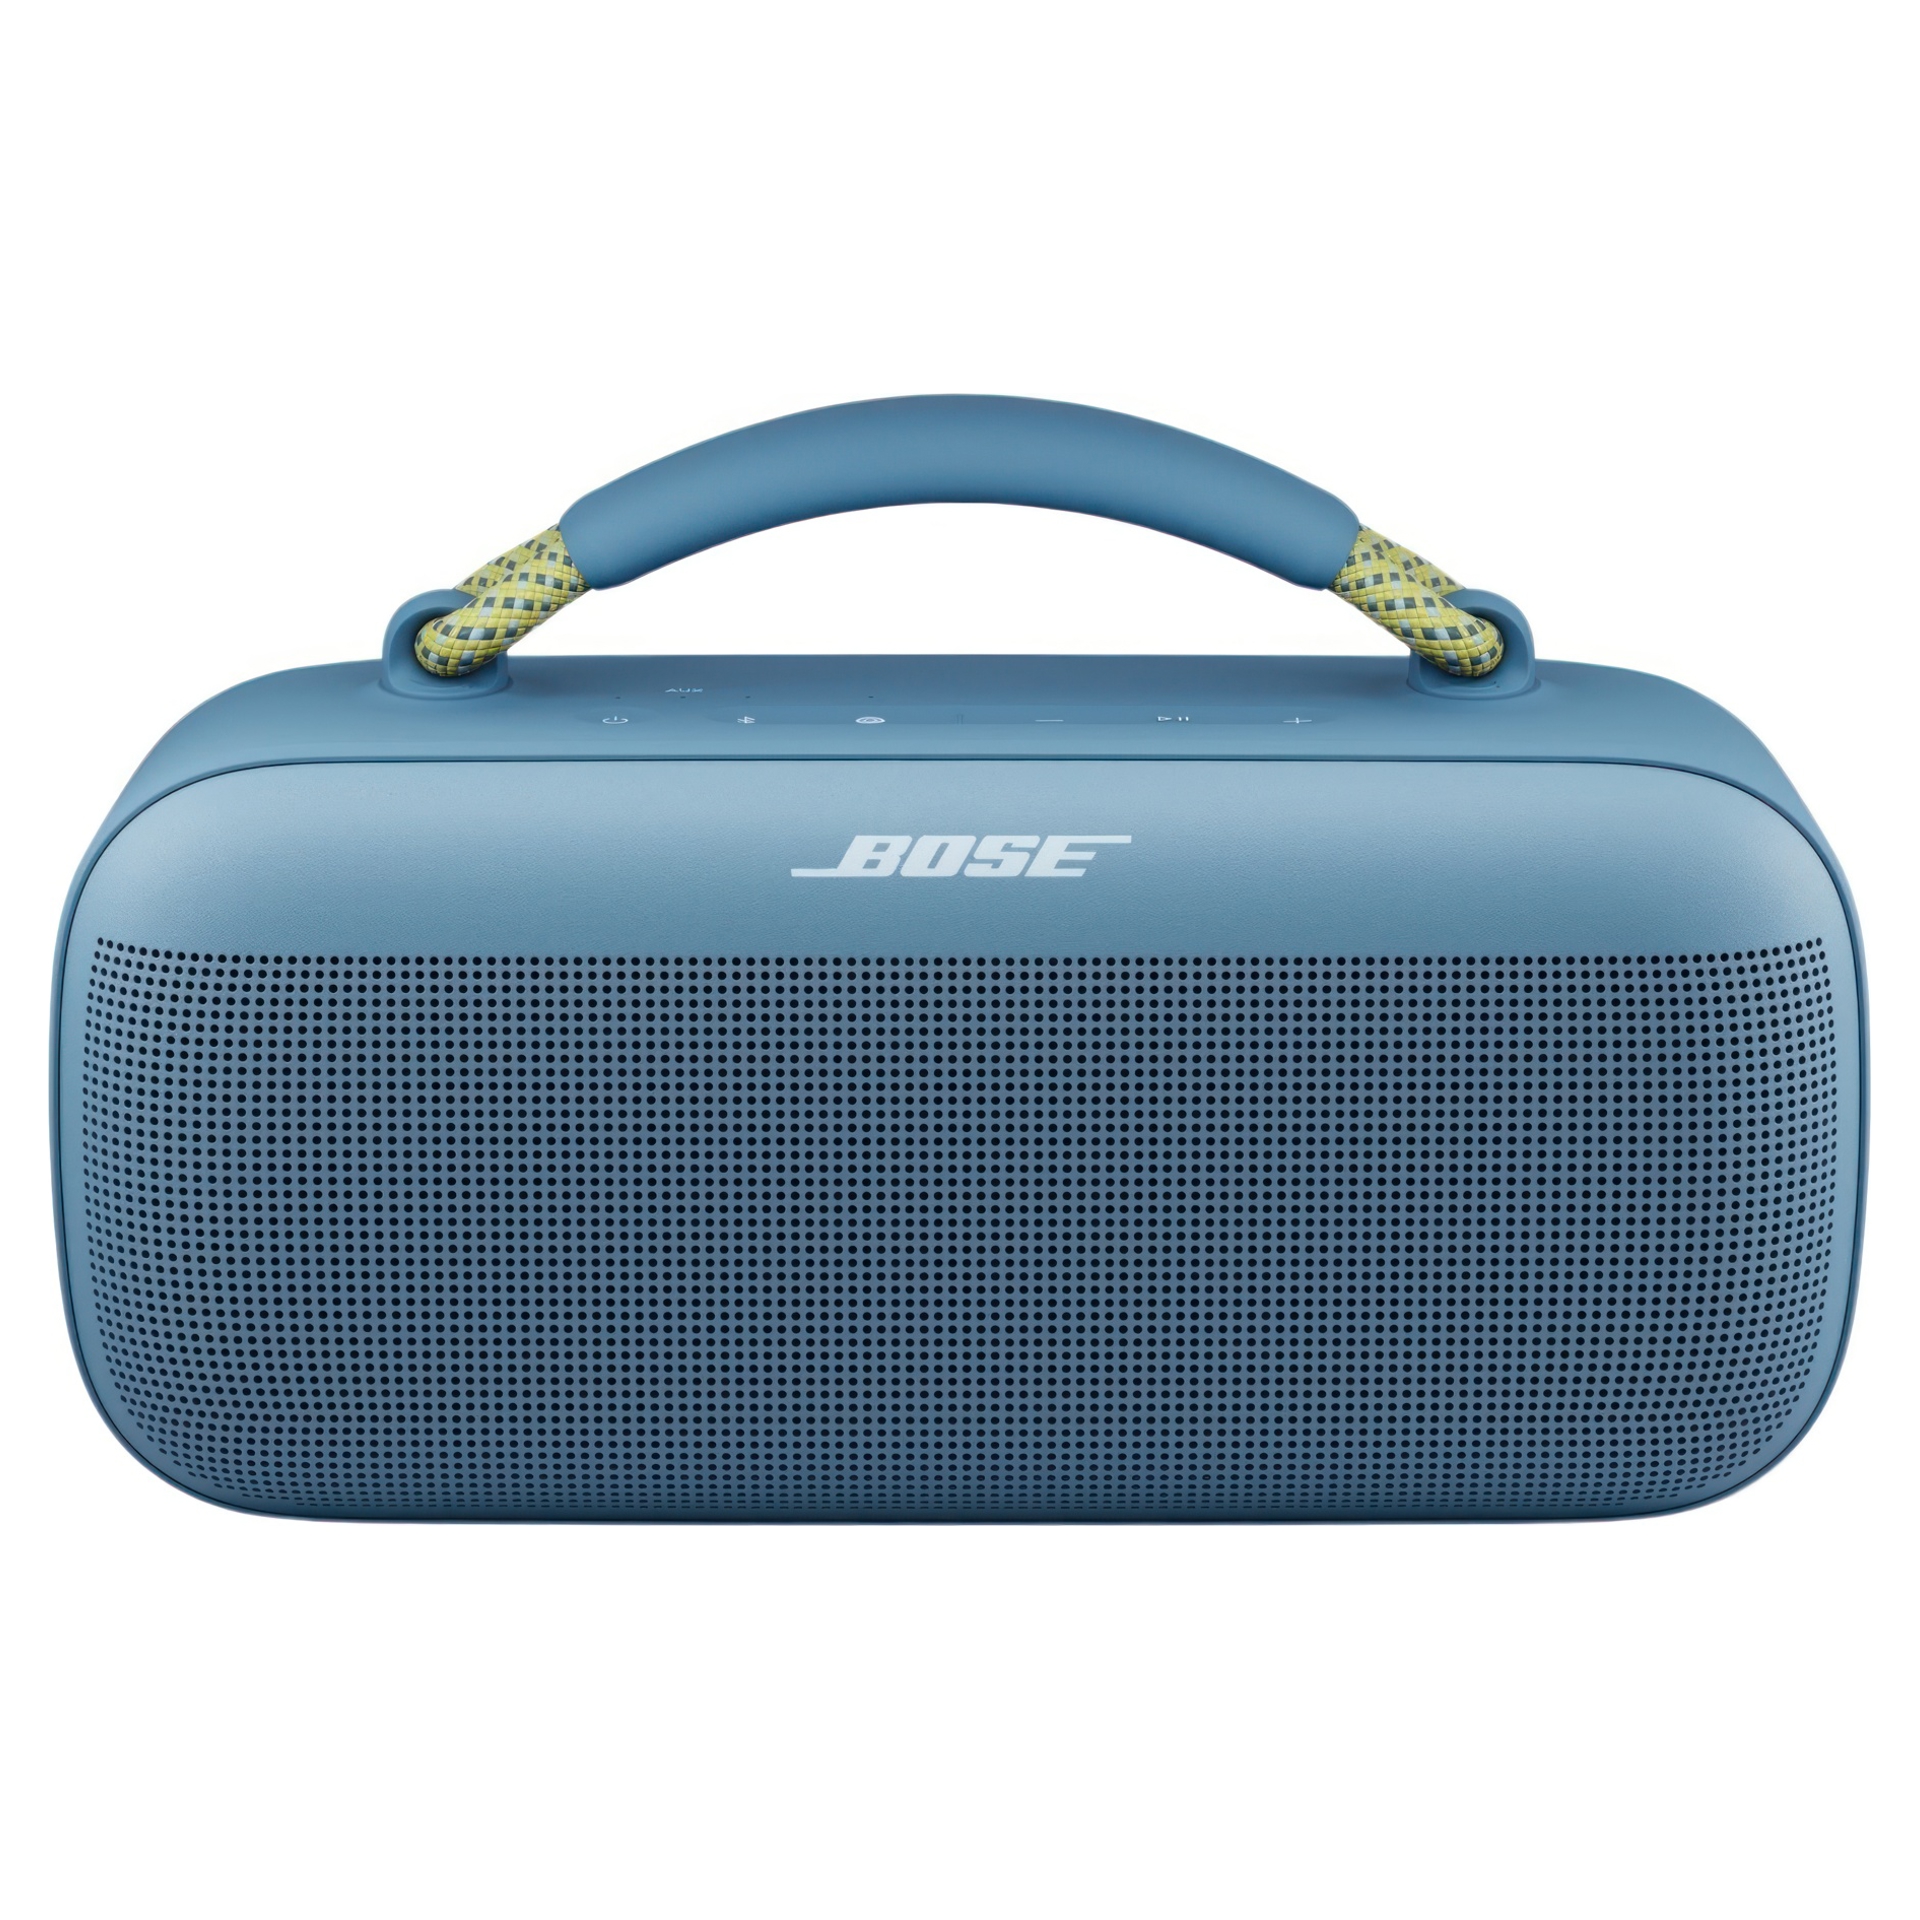 leaked bose soundlink max appears to be a jumbo sequel to the soundlink flex